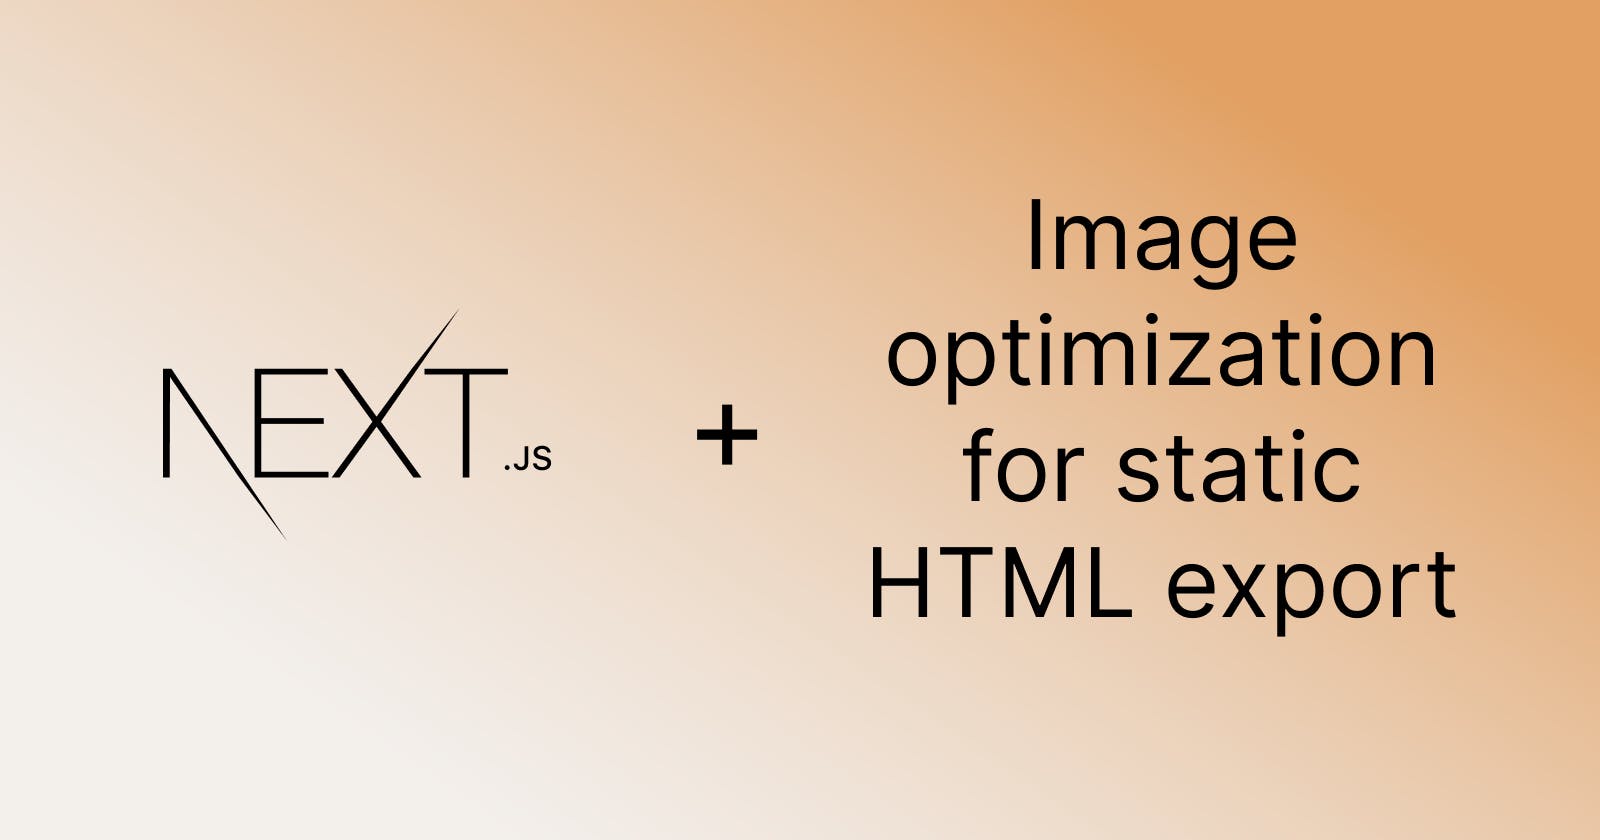 Enable image optimization for static HTML export with Next.js